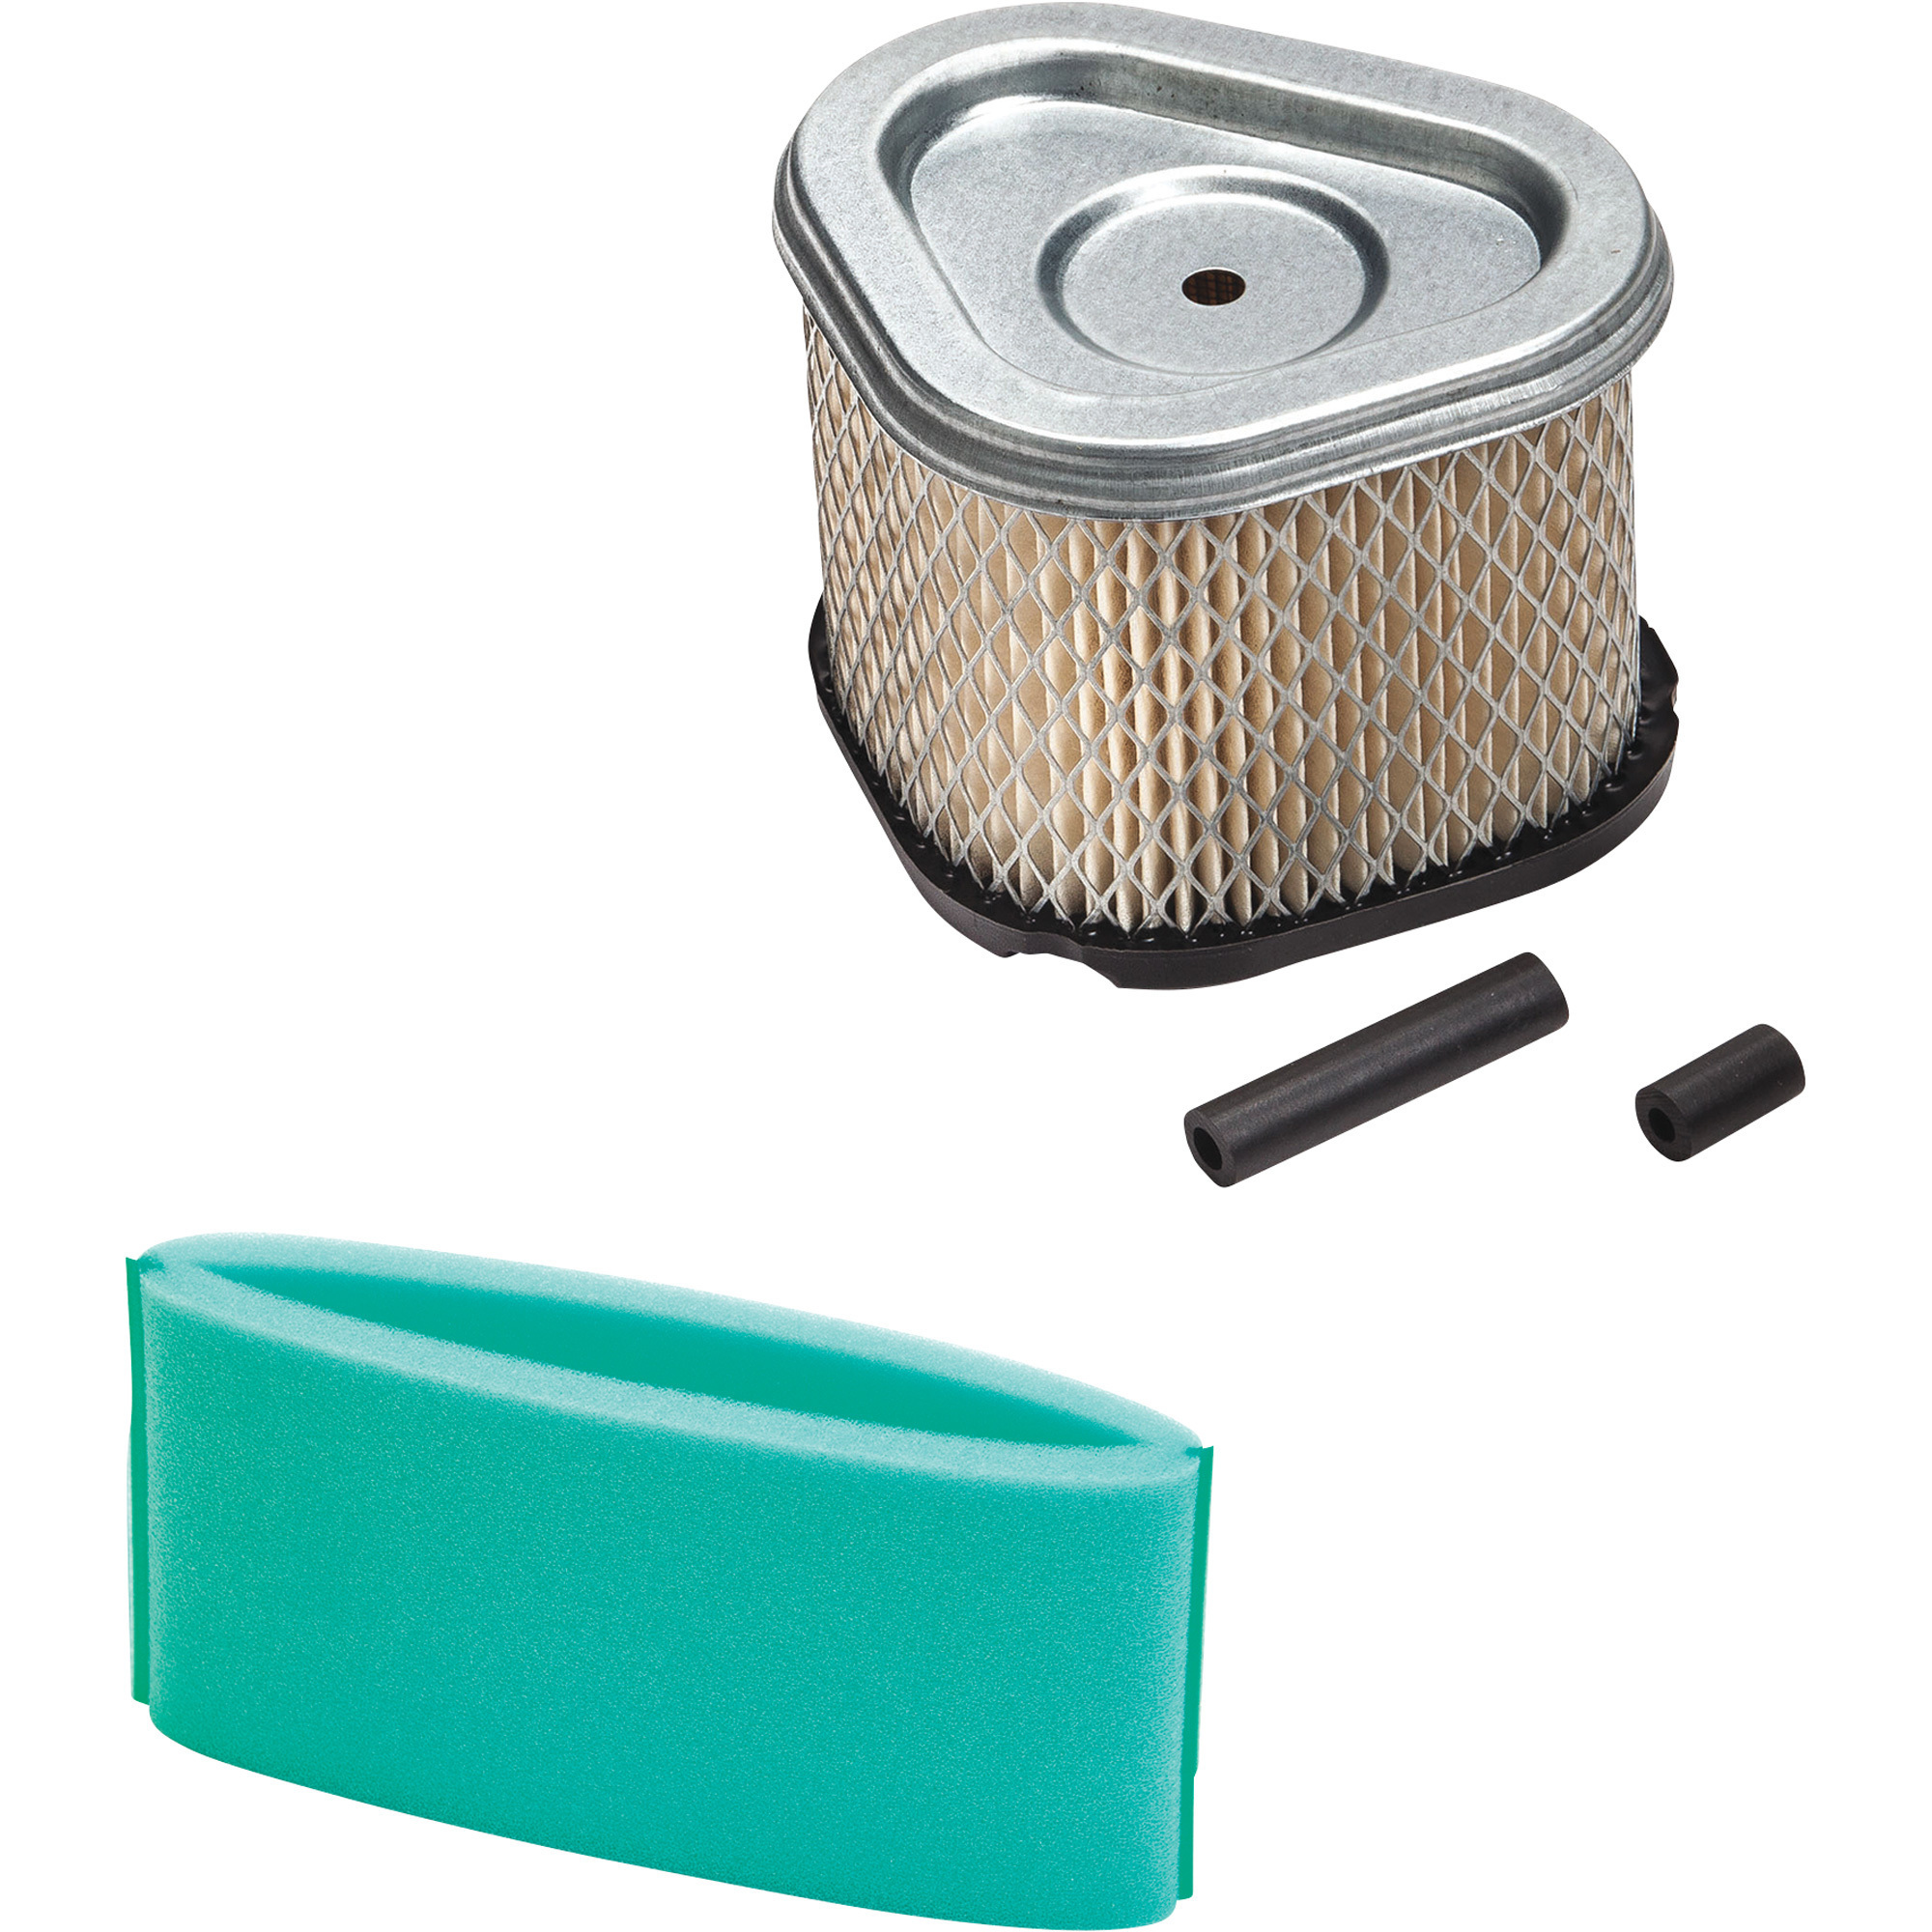 Oregon Air Filter and Pre-Cleaner Kit, Replacement for Kohler OEM Part# 12 883 10-S1, Model 30-088CSK